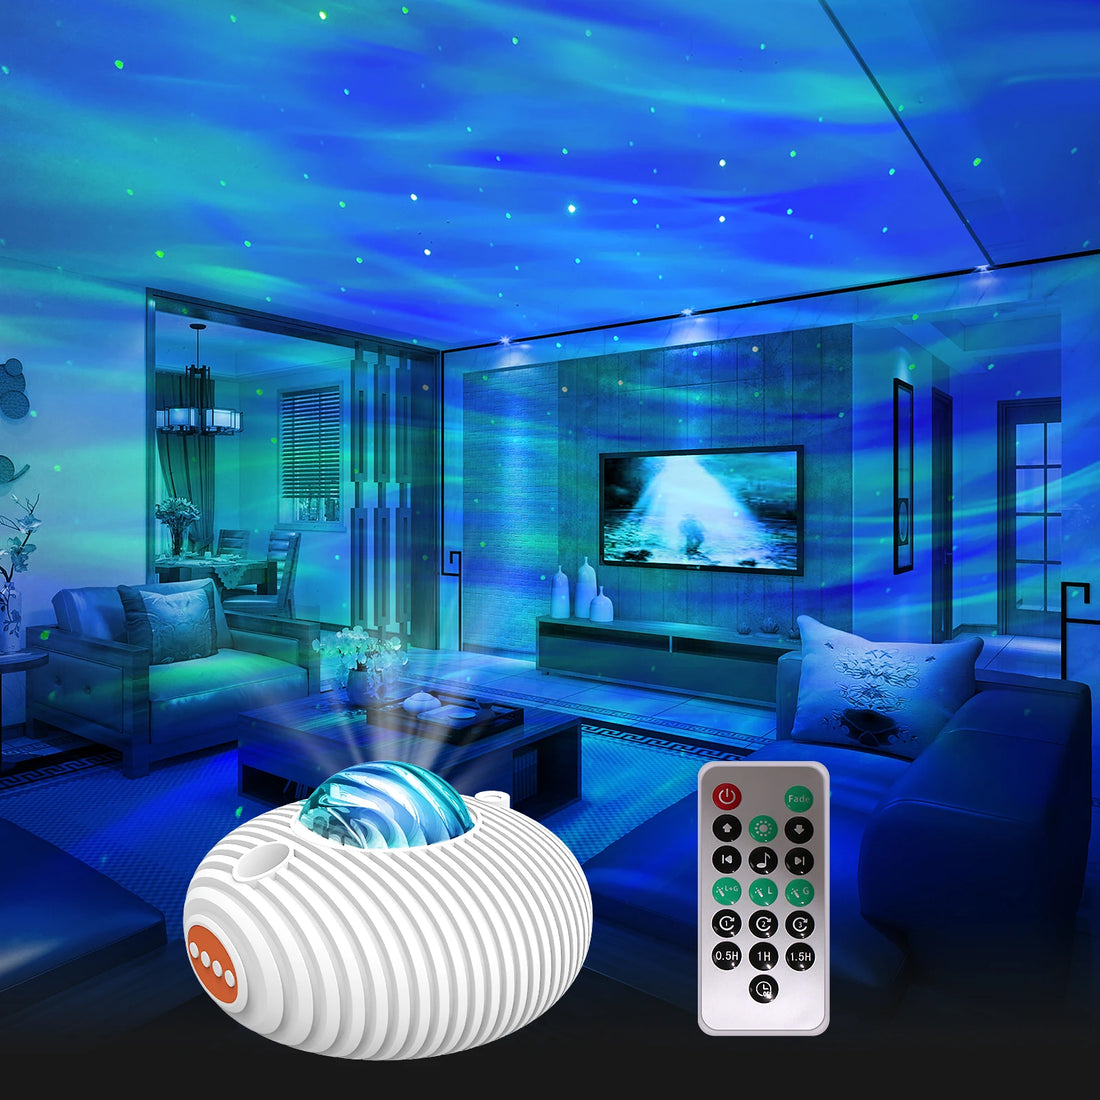 LED Galaxy Projector Night Light with Timer and Remote Control 14 Colors Built-in 5 Music Star Projecto For Bedroom Decoration